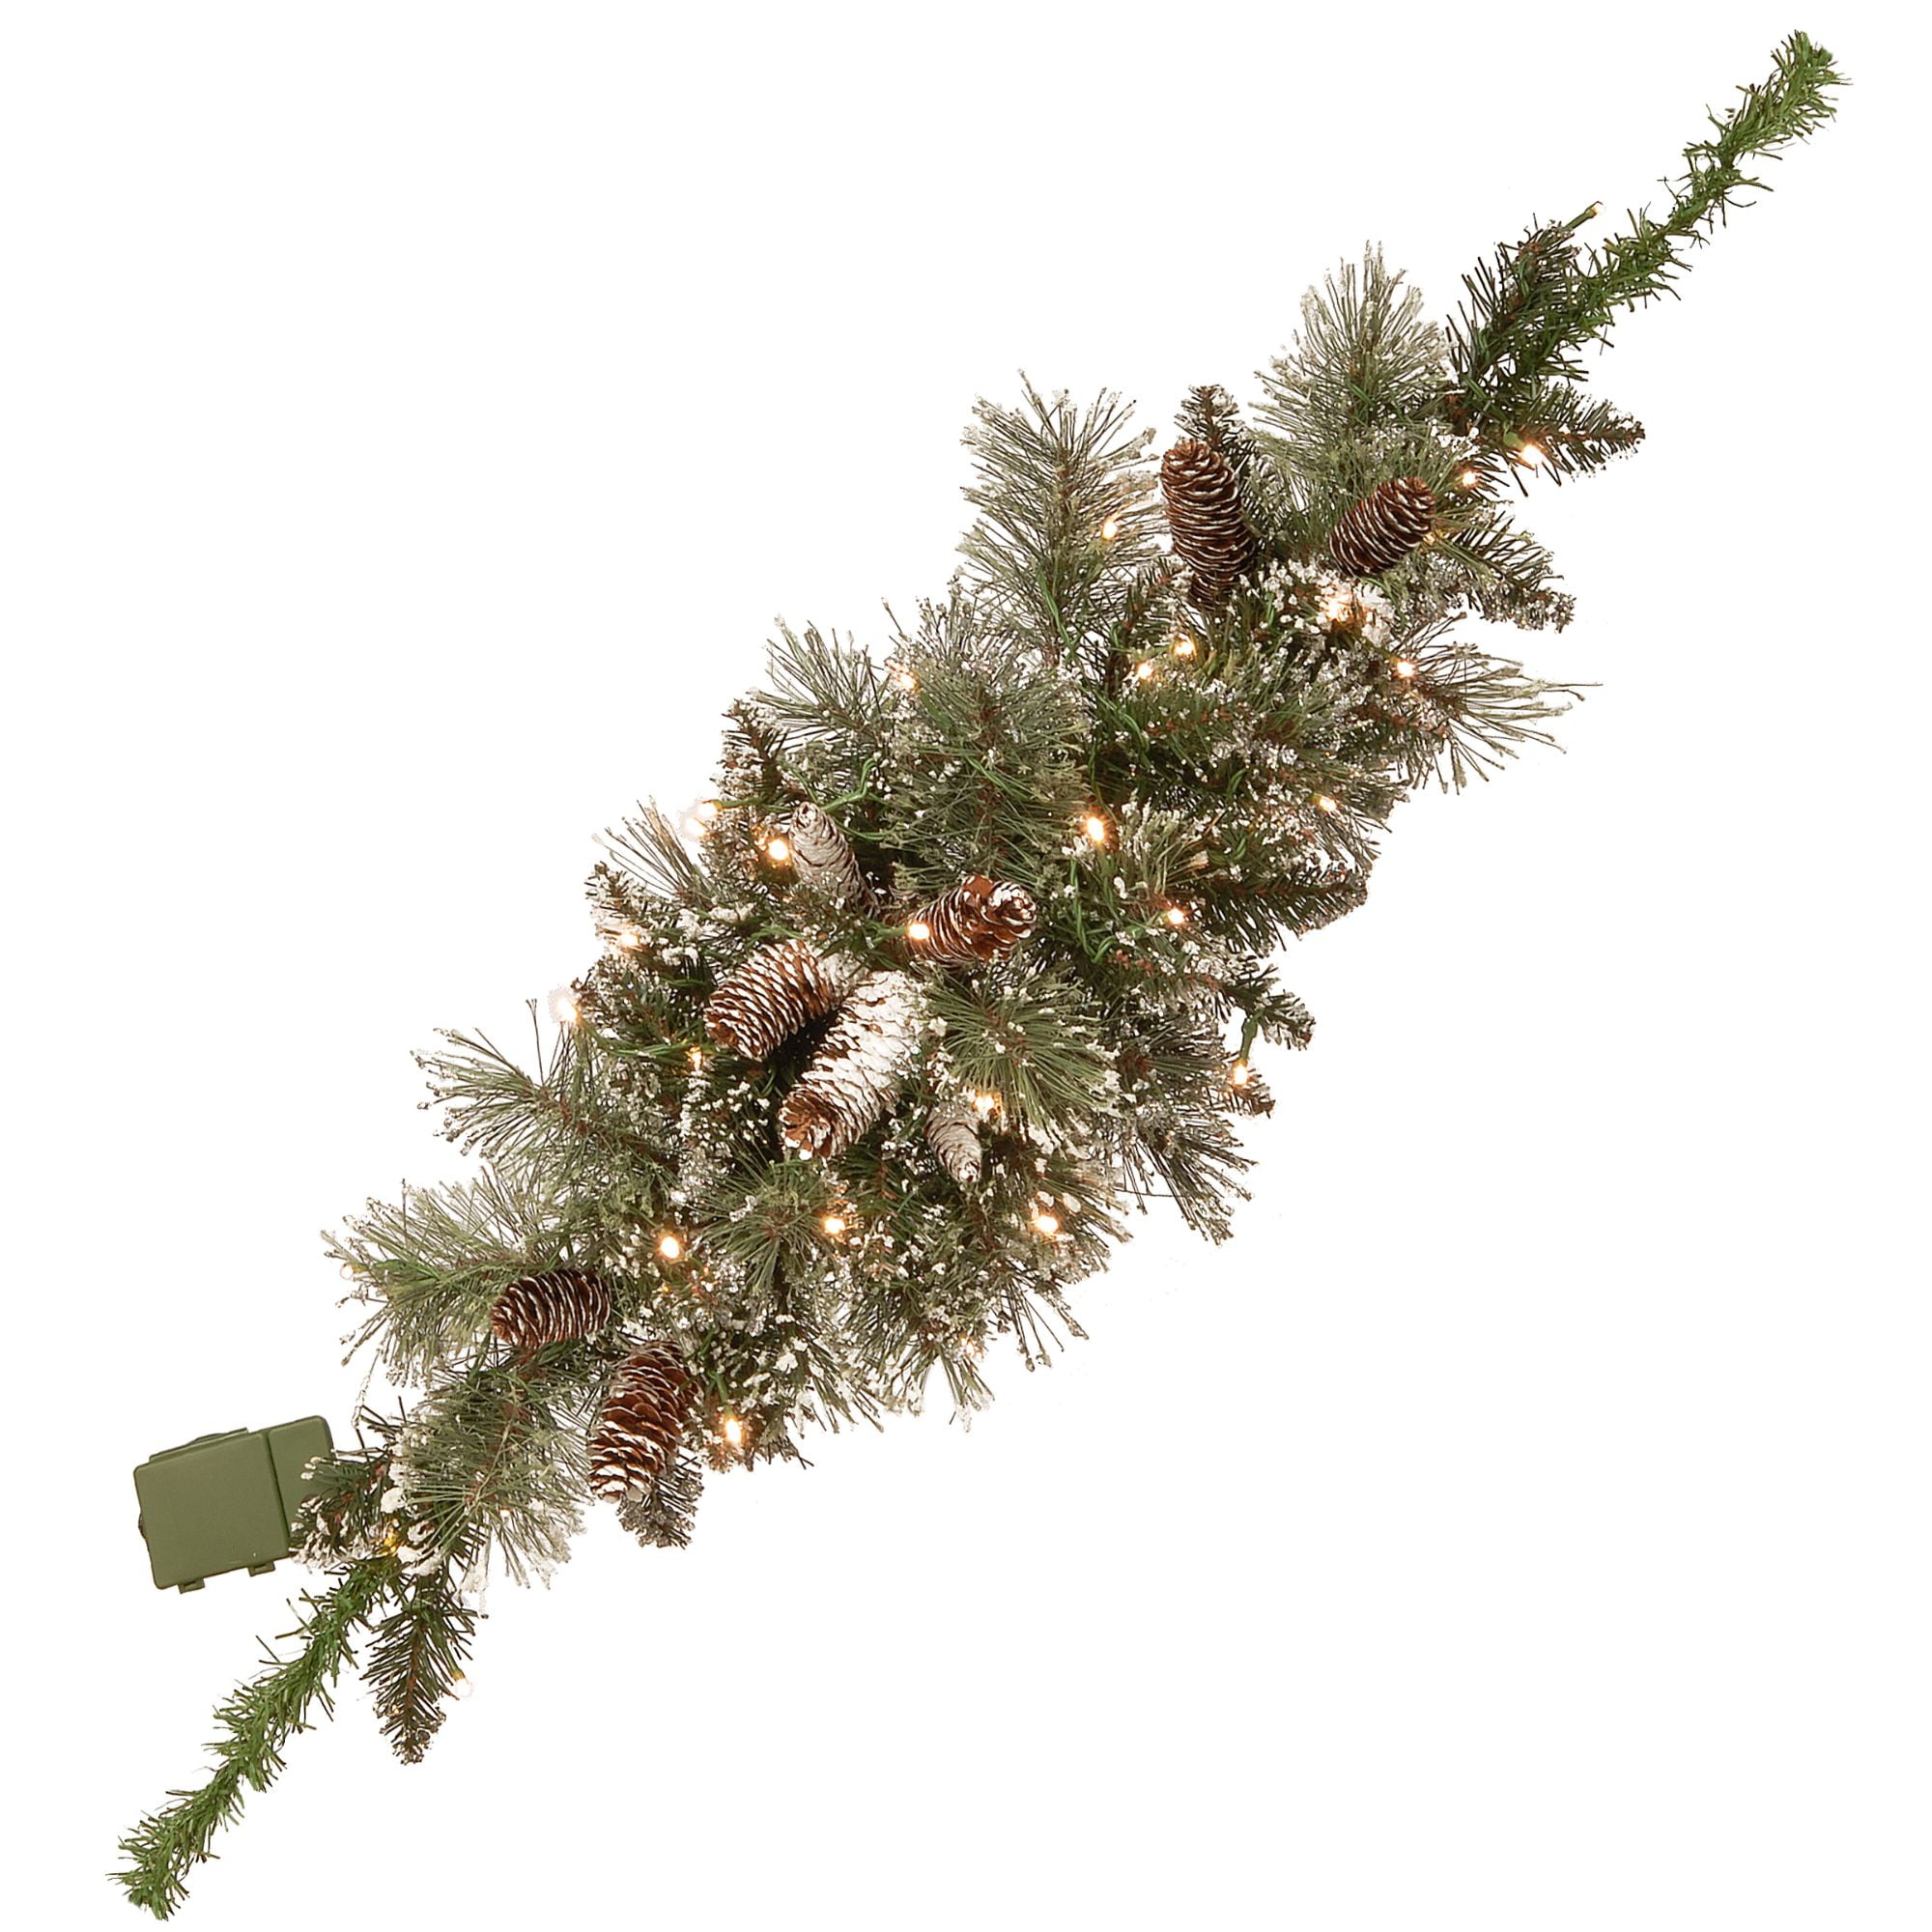 GB1-50-6A-1 Renewed National Tree 6 Foot by 10 Inch Glittery Bristle Pine Garland with Cones